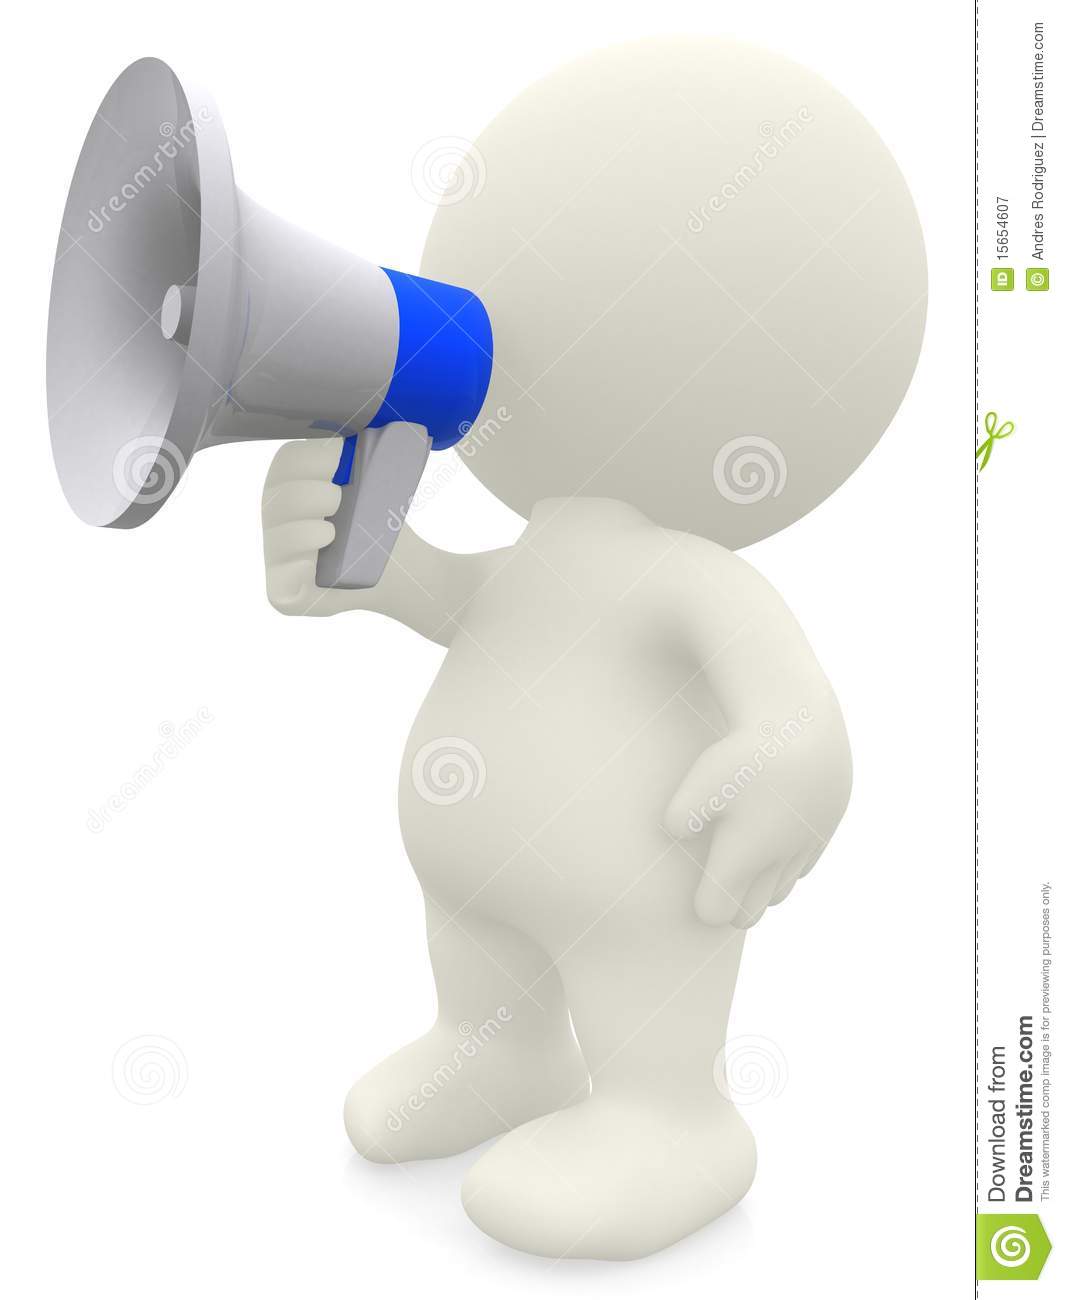 3d Man Shouting Through A Megaphone   Isolated Over A White Background